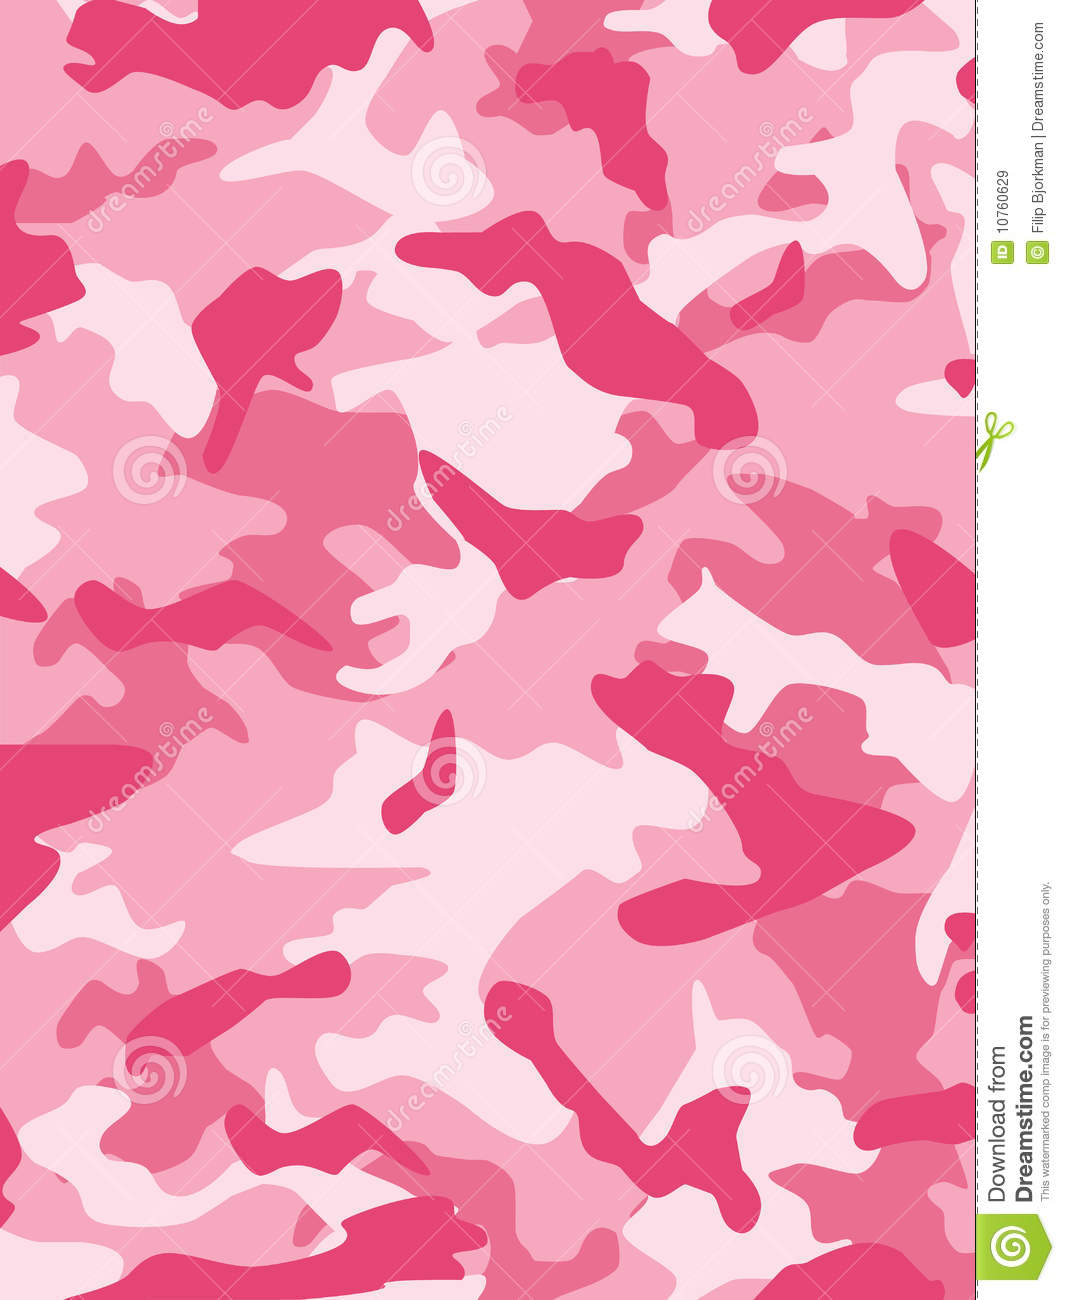 Pink Army Camouflage Wallpaper